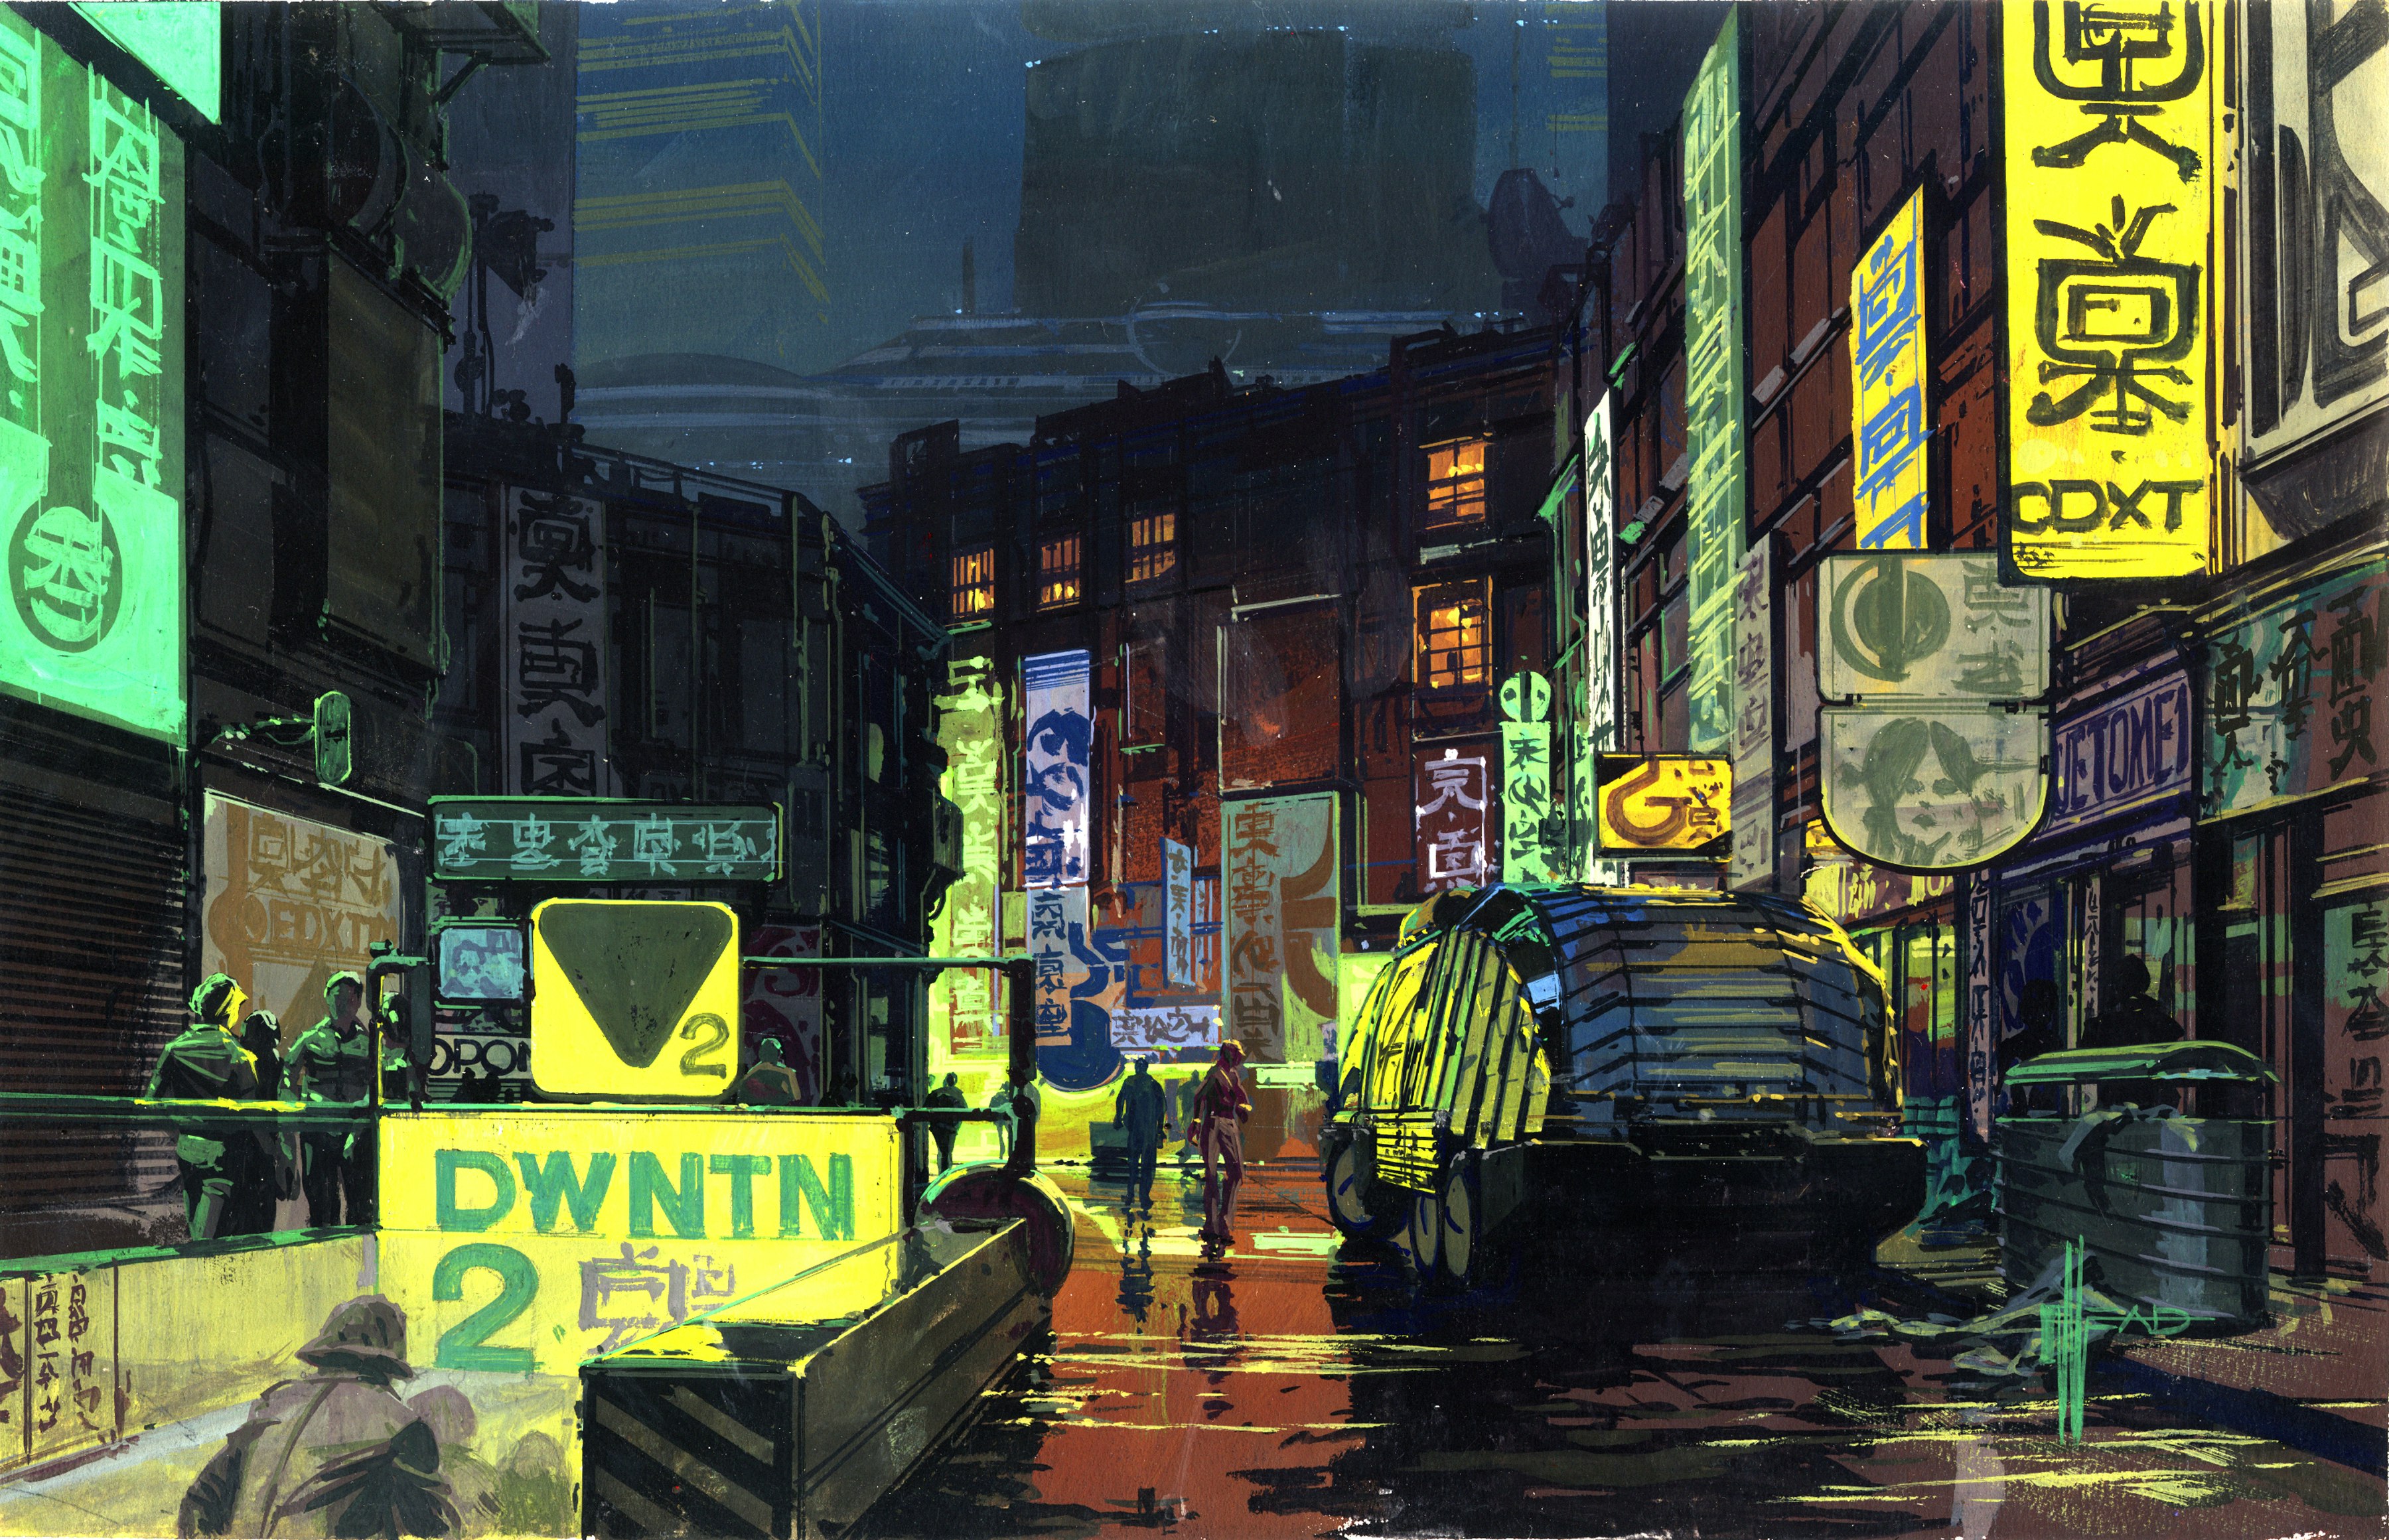 Drawing of city street with bright neon signs on storefronts; a large, futuristic vehicle is parked on the right.